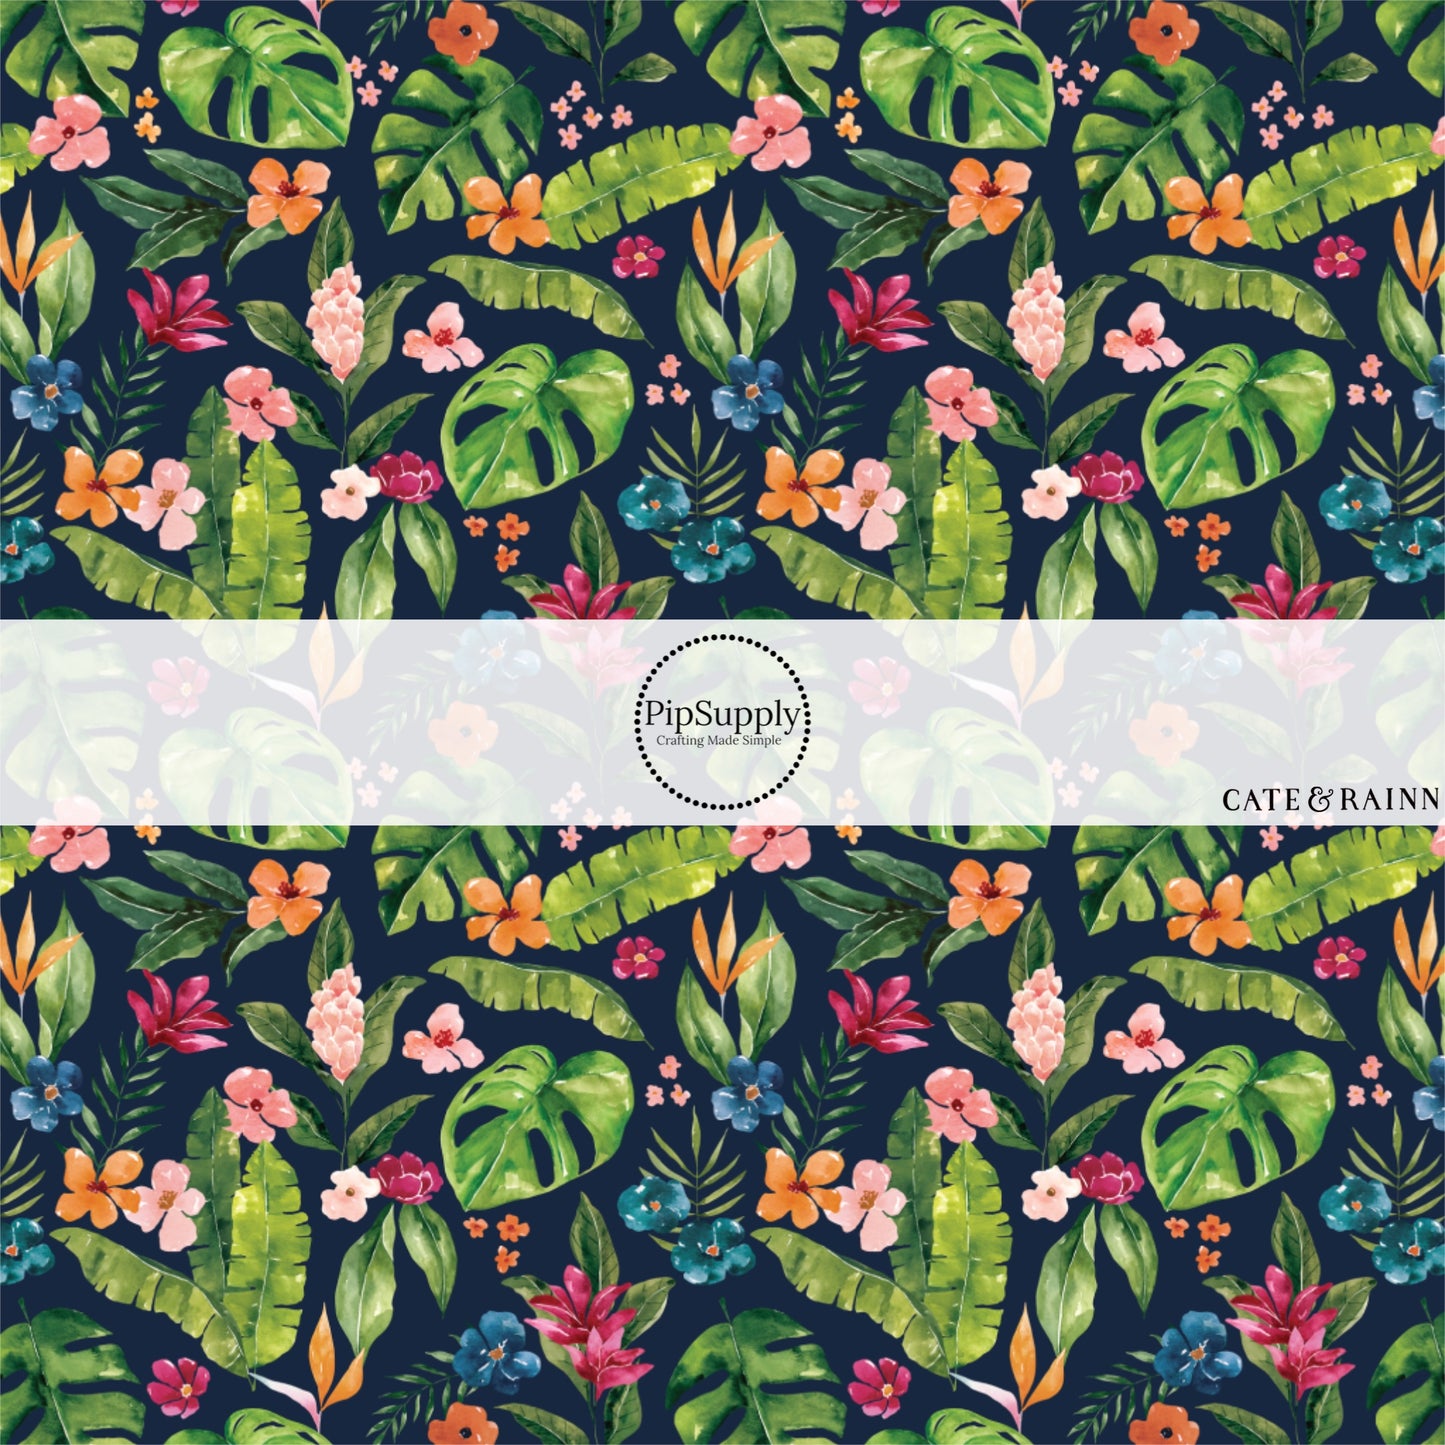 These jungle pattern fabric by the yard features tropical jungle foliage. This fun fabric can be used for all your sewing and crafting needs!